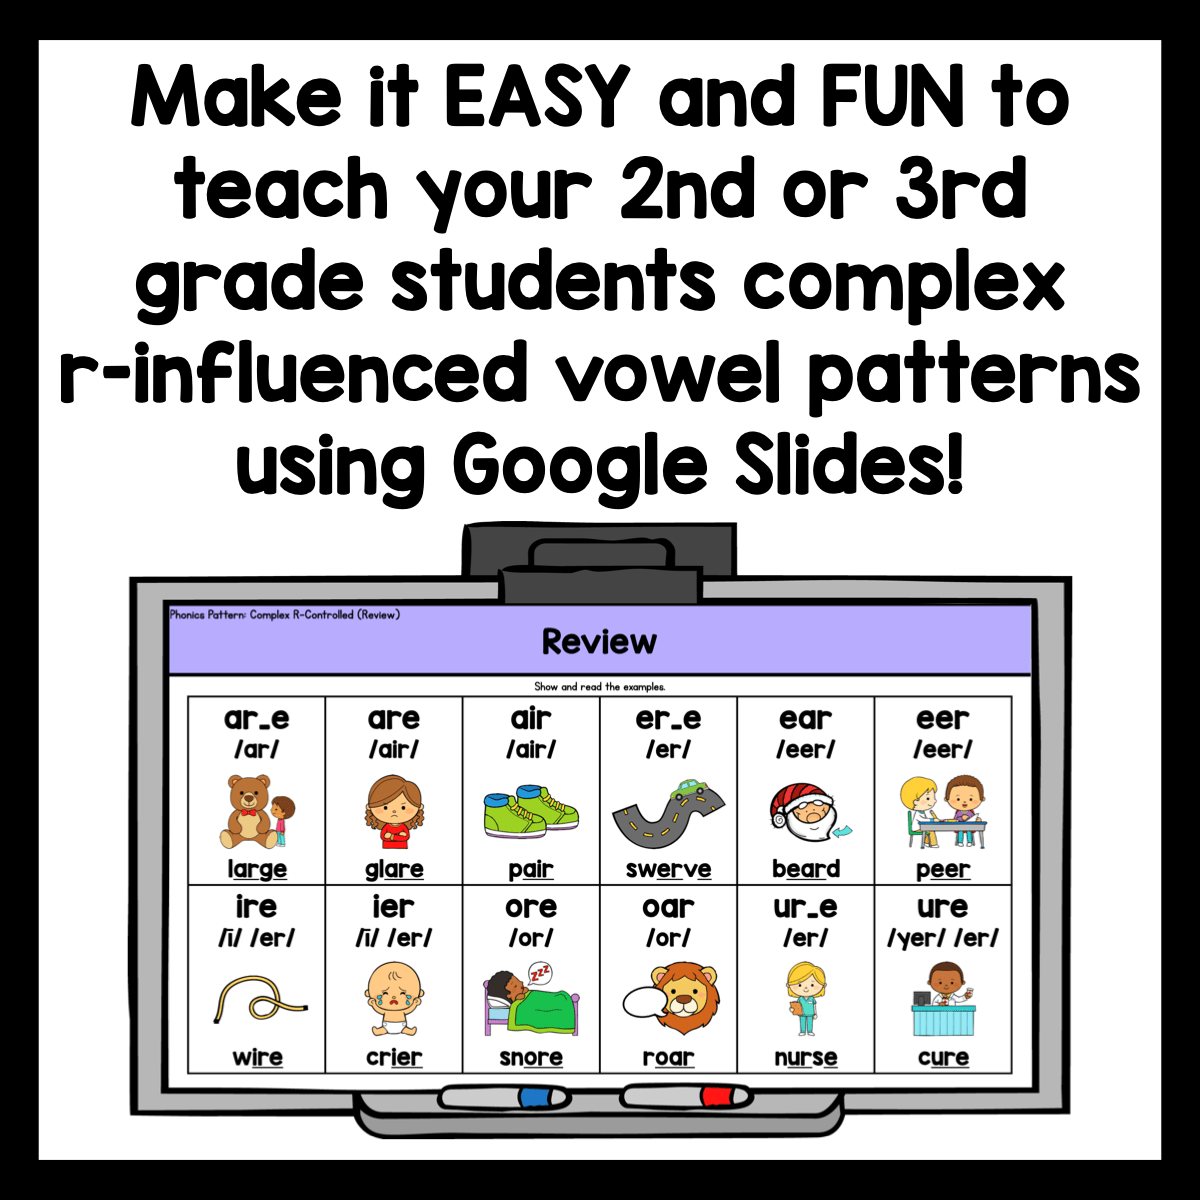 Complex R - Influenced Vowel Patterns Phonics Slides | Google Slides Phonics - Learning at the Primary Pond